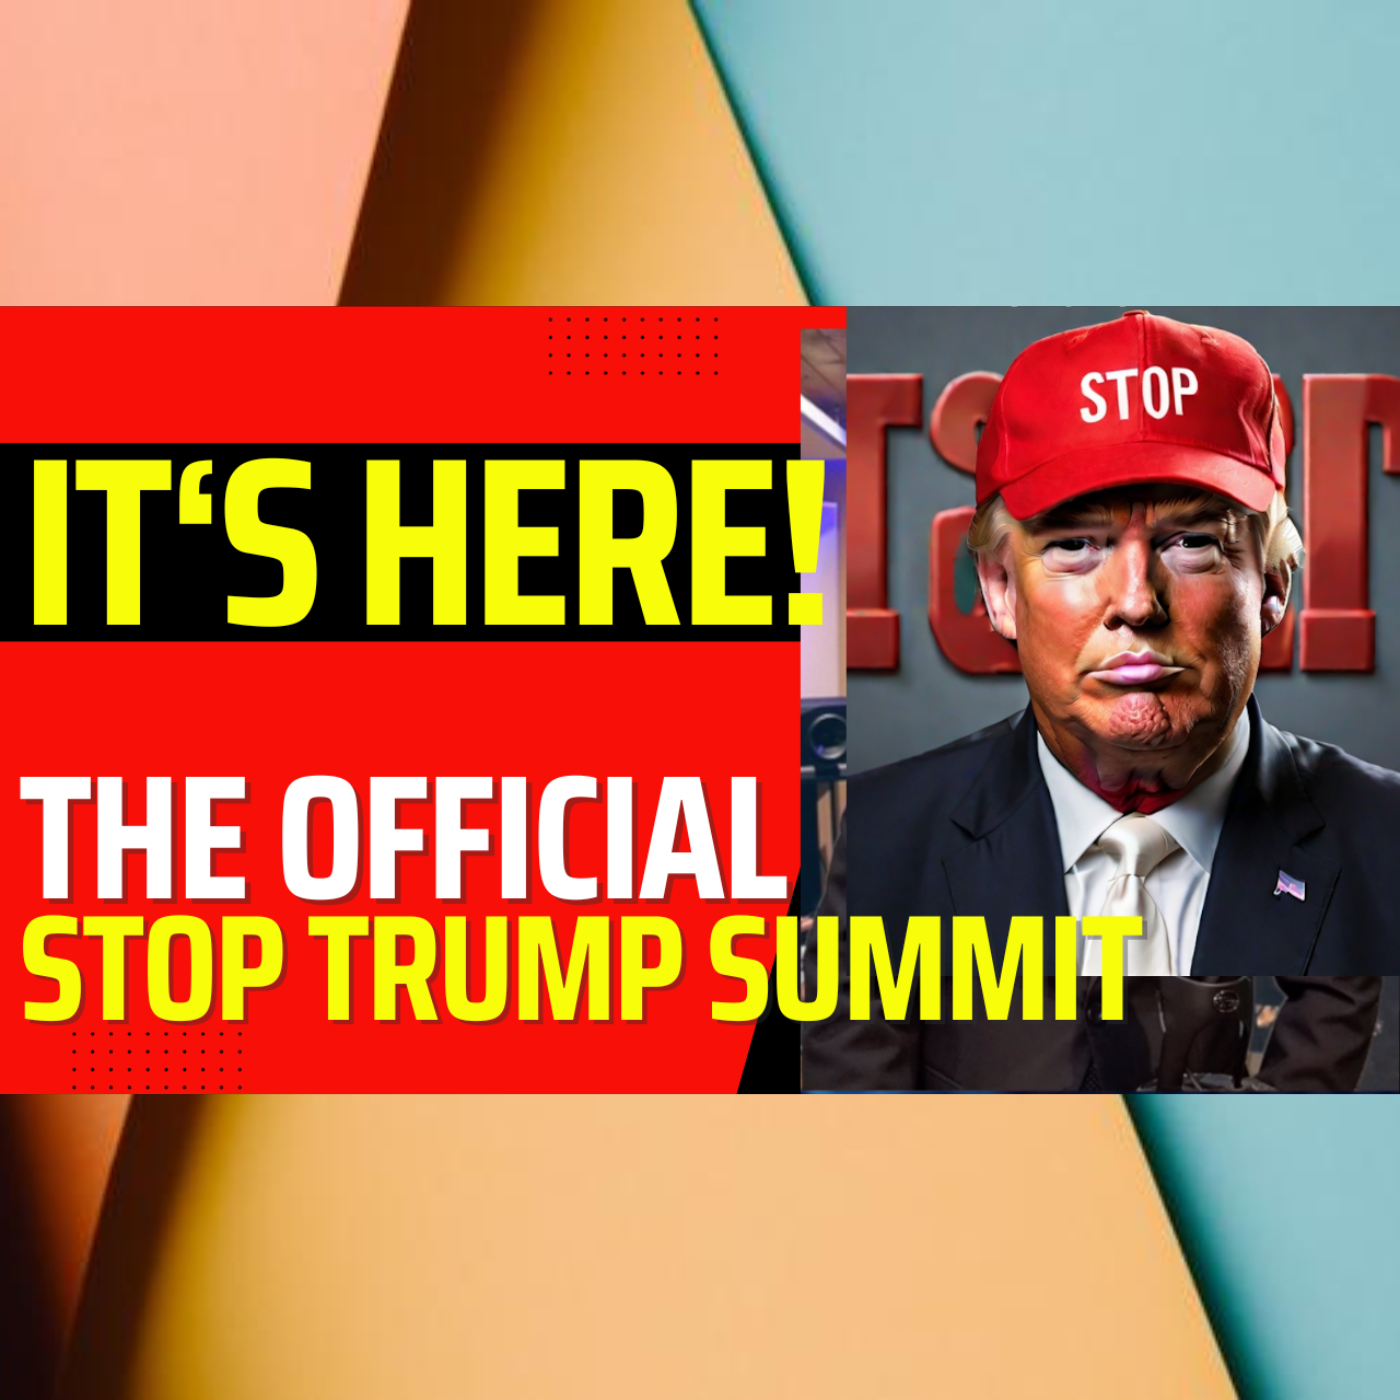 Stop Trump Summit has launched